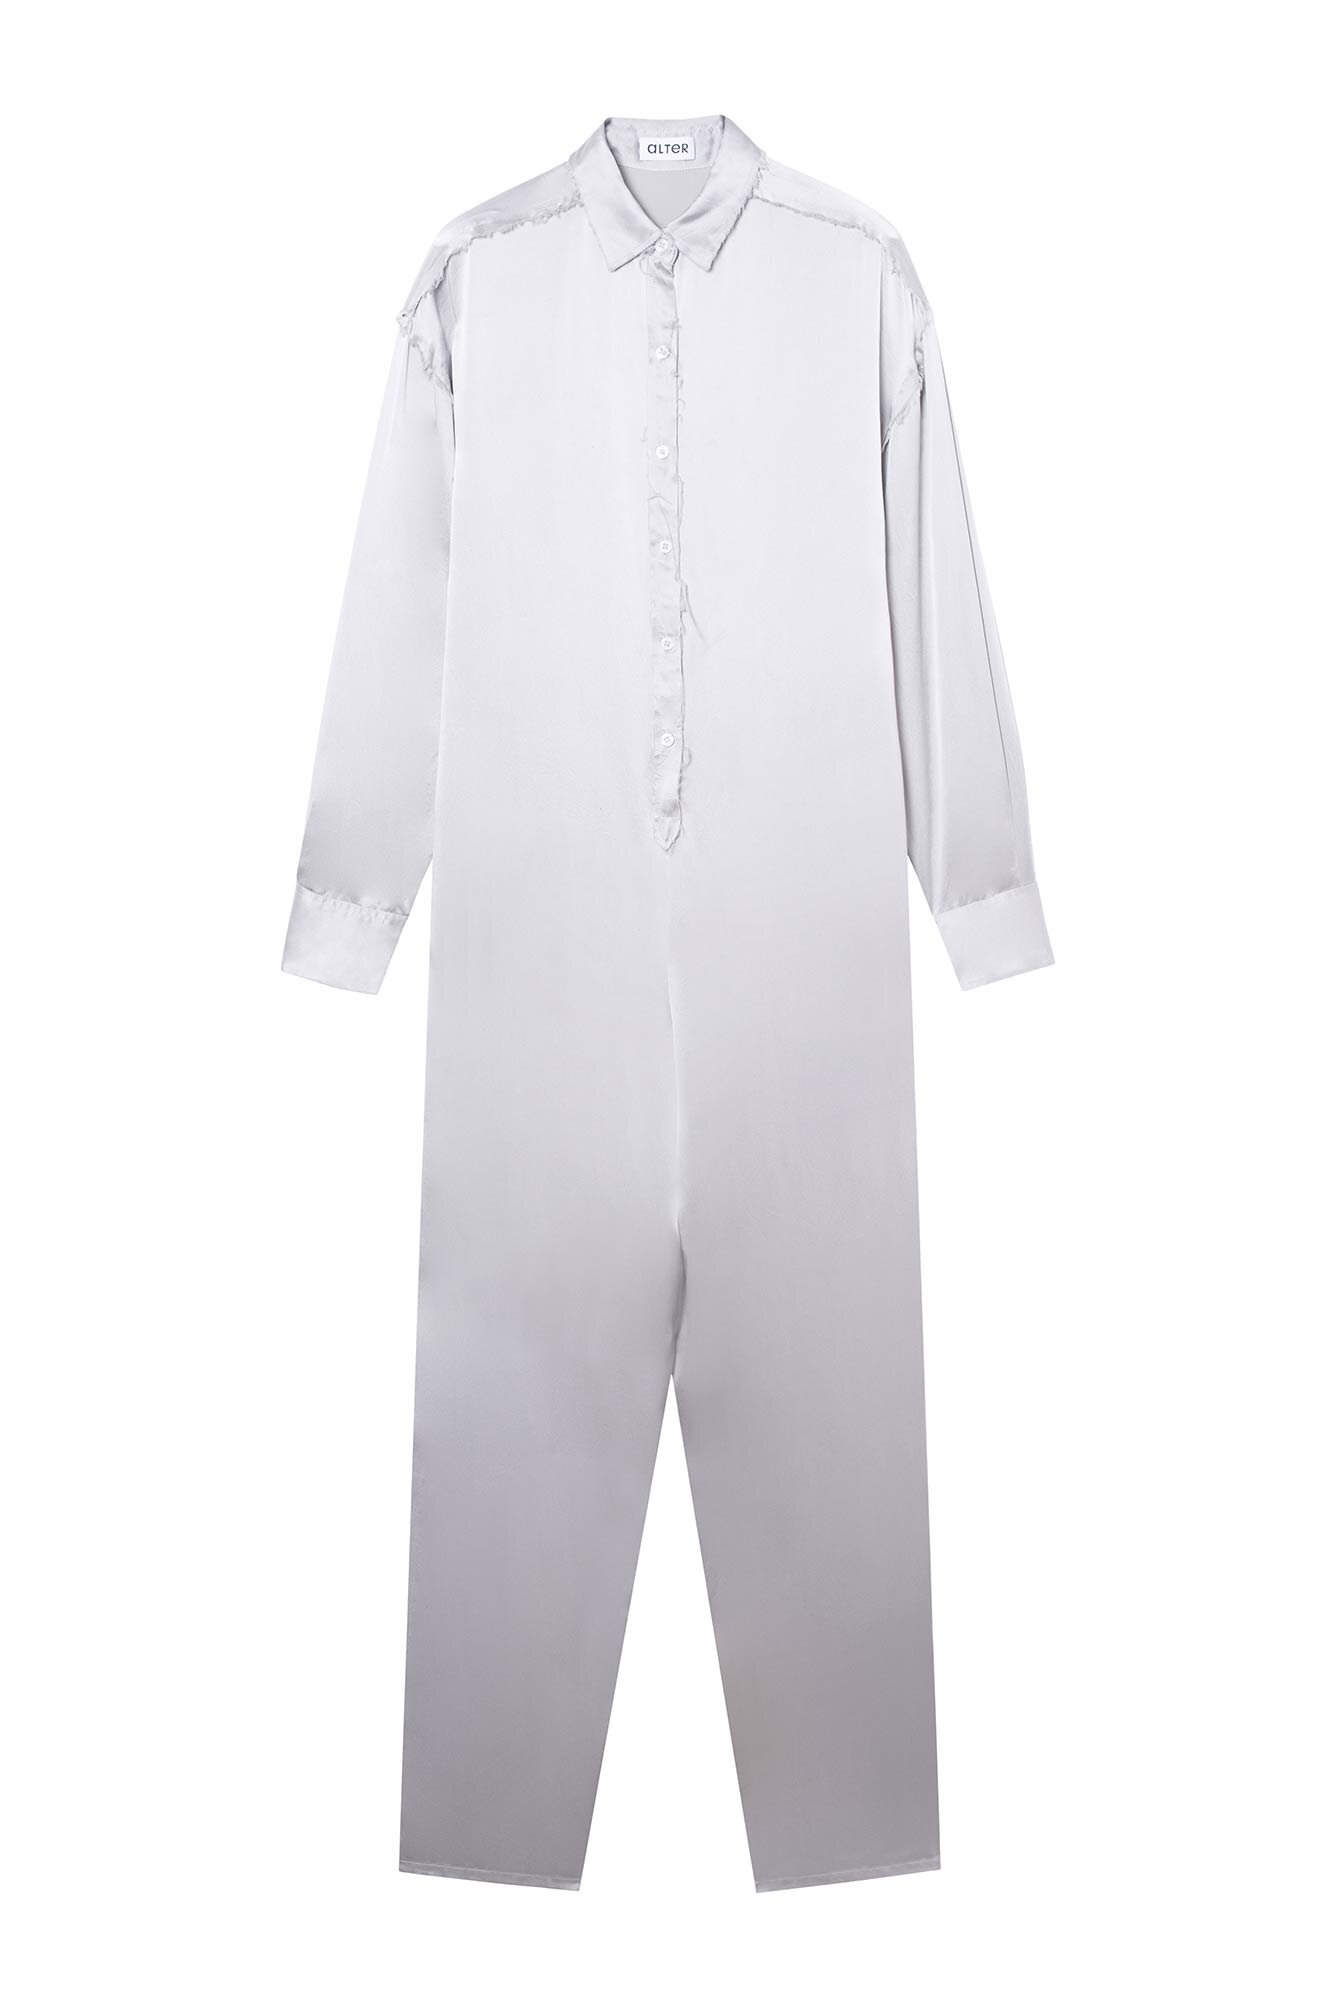 Alter Designs Silk Charmeuse Shirt Jumpsuit in Silver.jpg